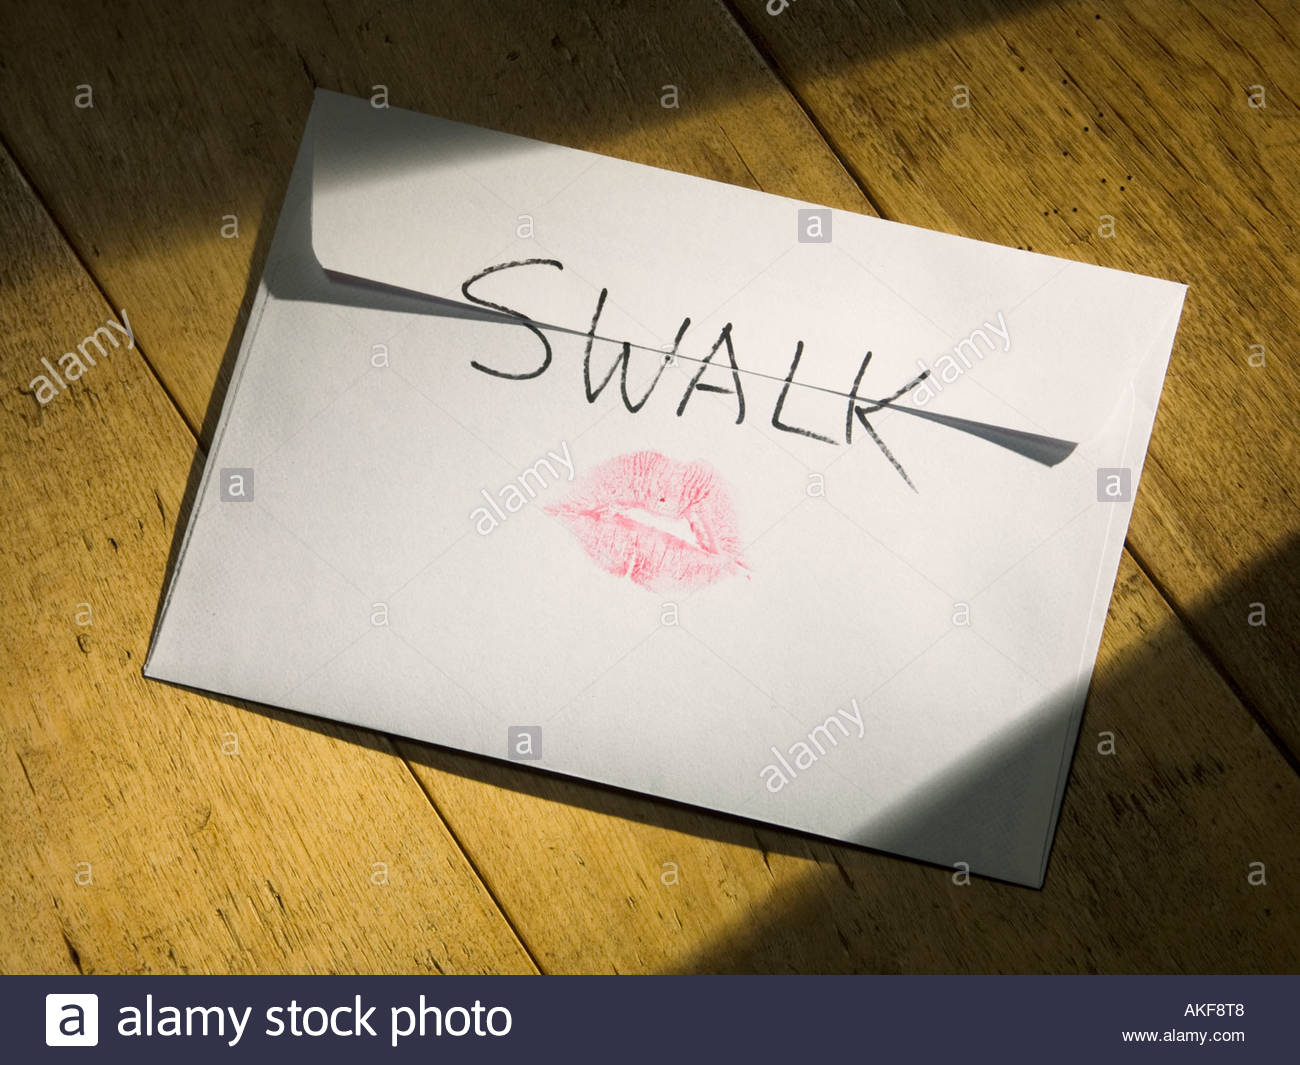 Attached picture an-envelope-with-swalk-sealed-with-a-loving-kiss-on-the-back-and-a-AKF8T8.jpg